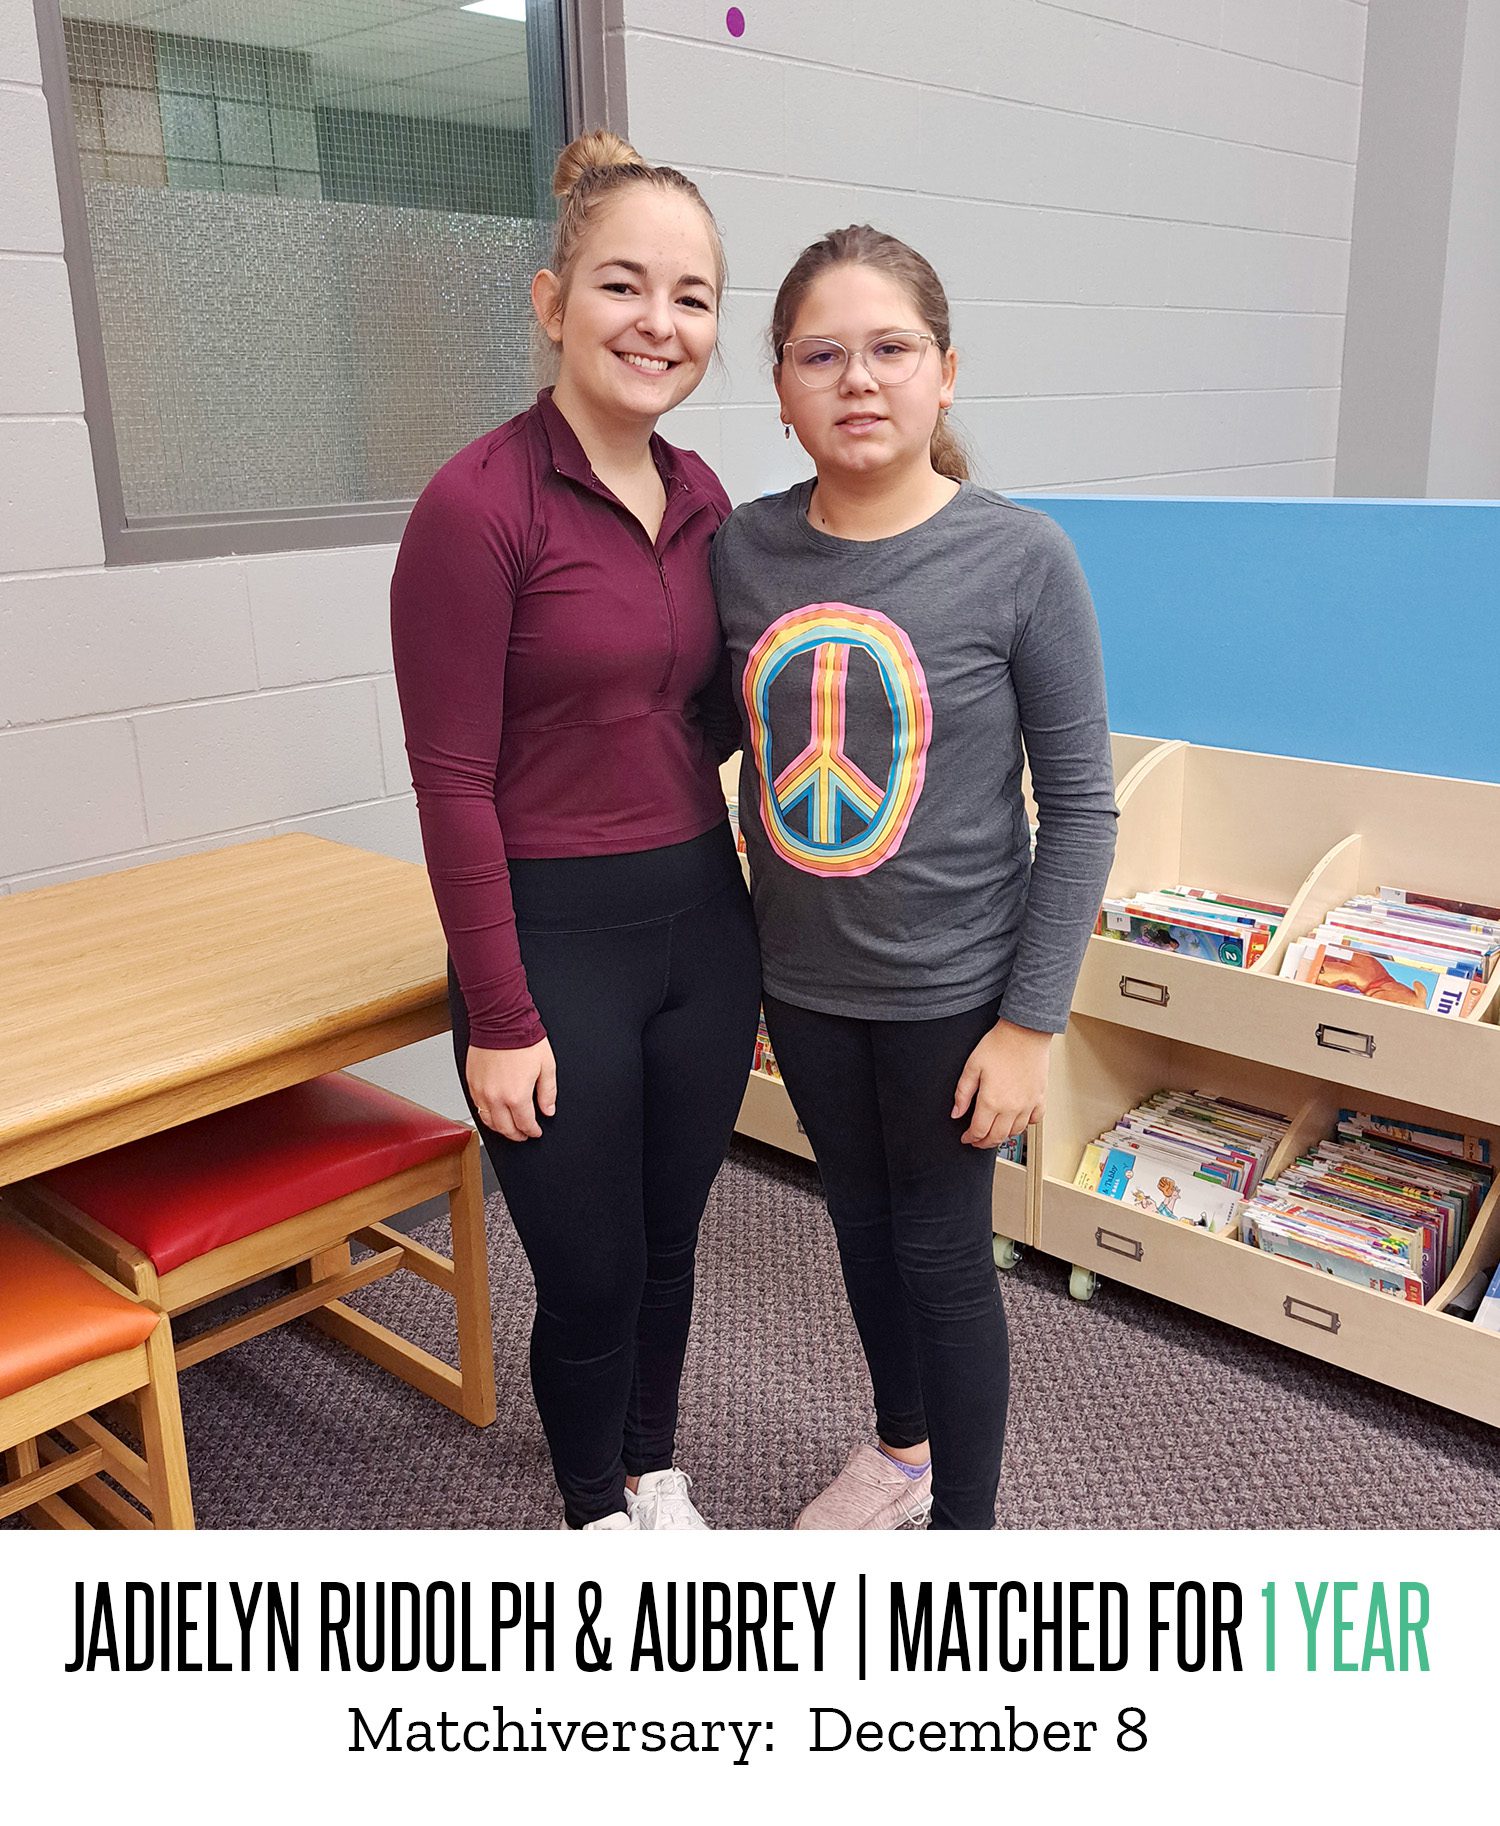 Jadielyn Rudolph and Aubrey pose for a picture after being matched for one year